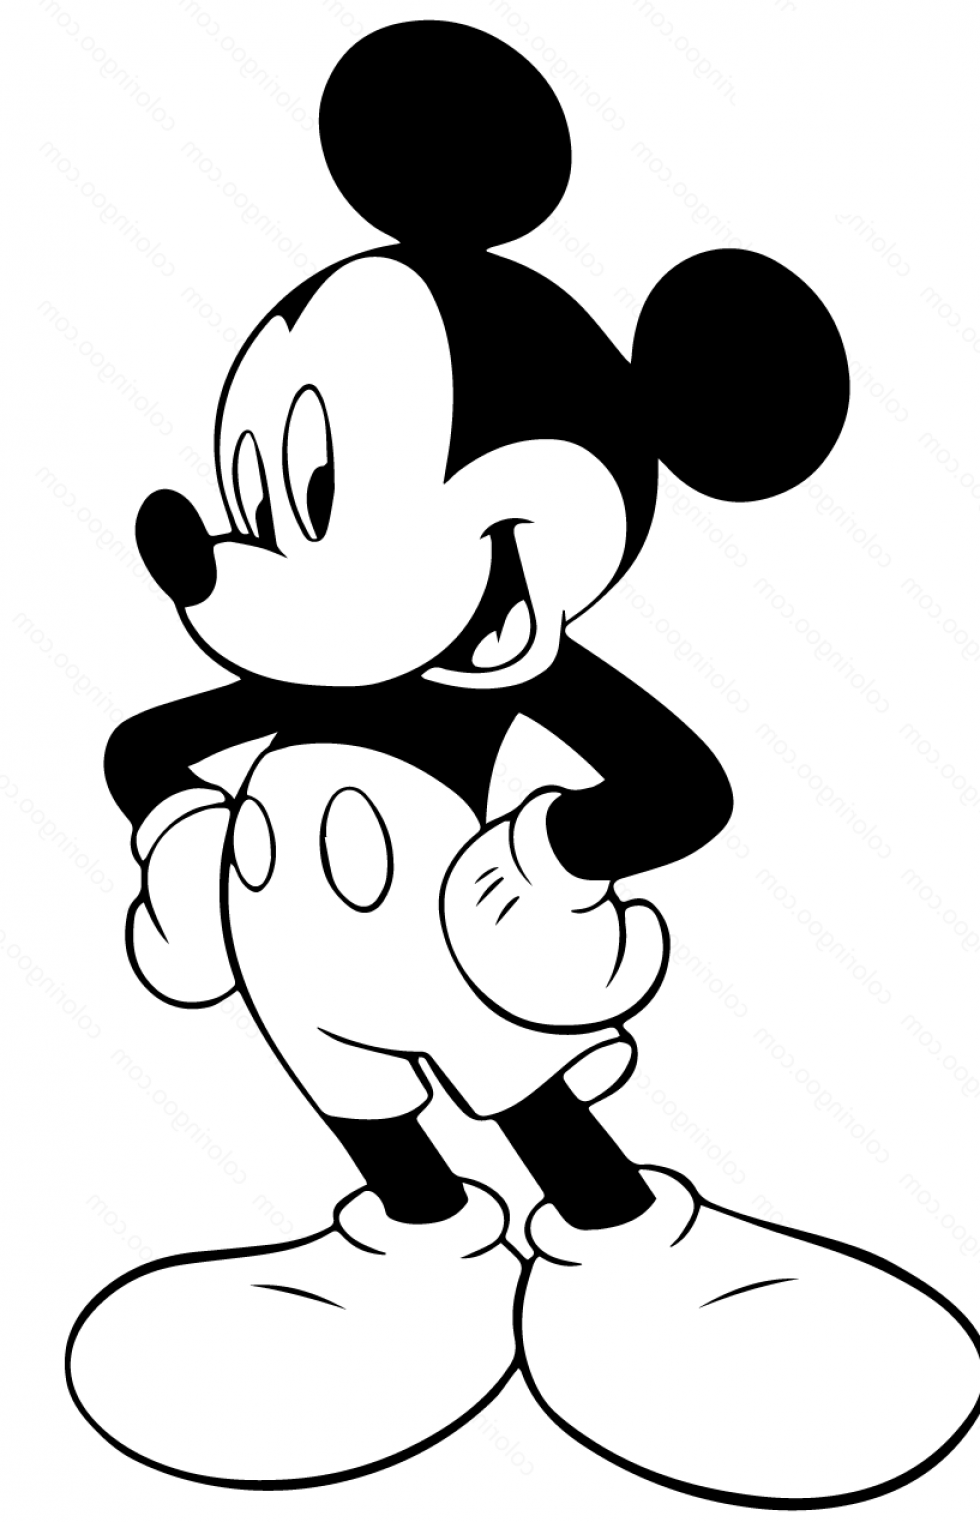 Super Funny Mickey Mouse Coloring Pages For Kids - SheetalColor.com